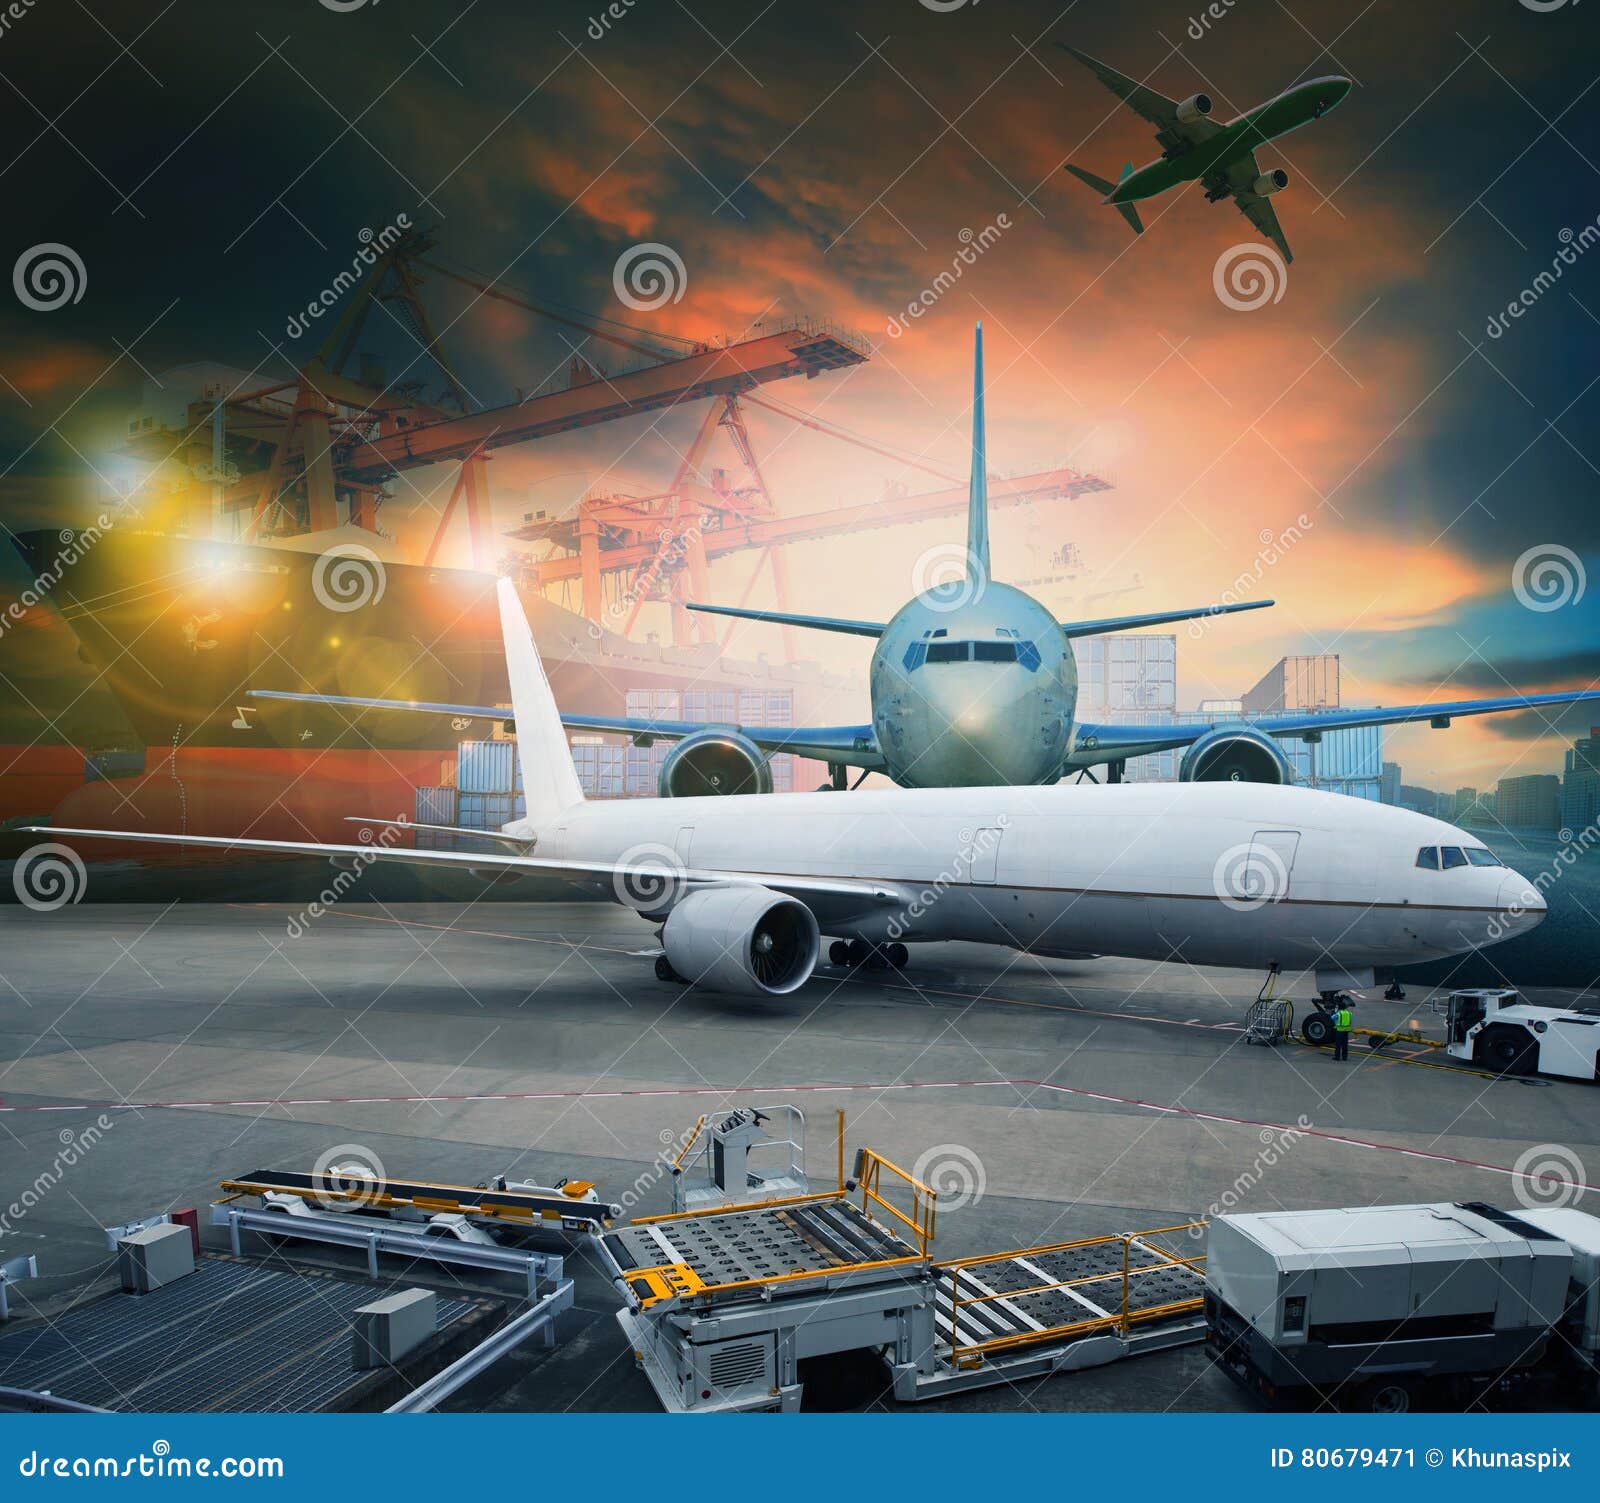 air freight and cargo plane loading in logistic airport use for shipping and logistic industries